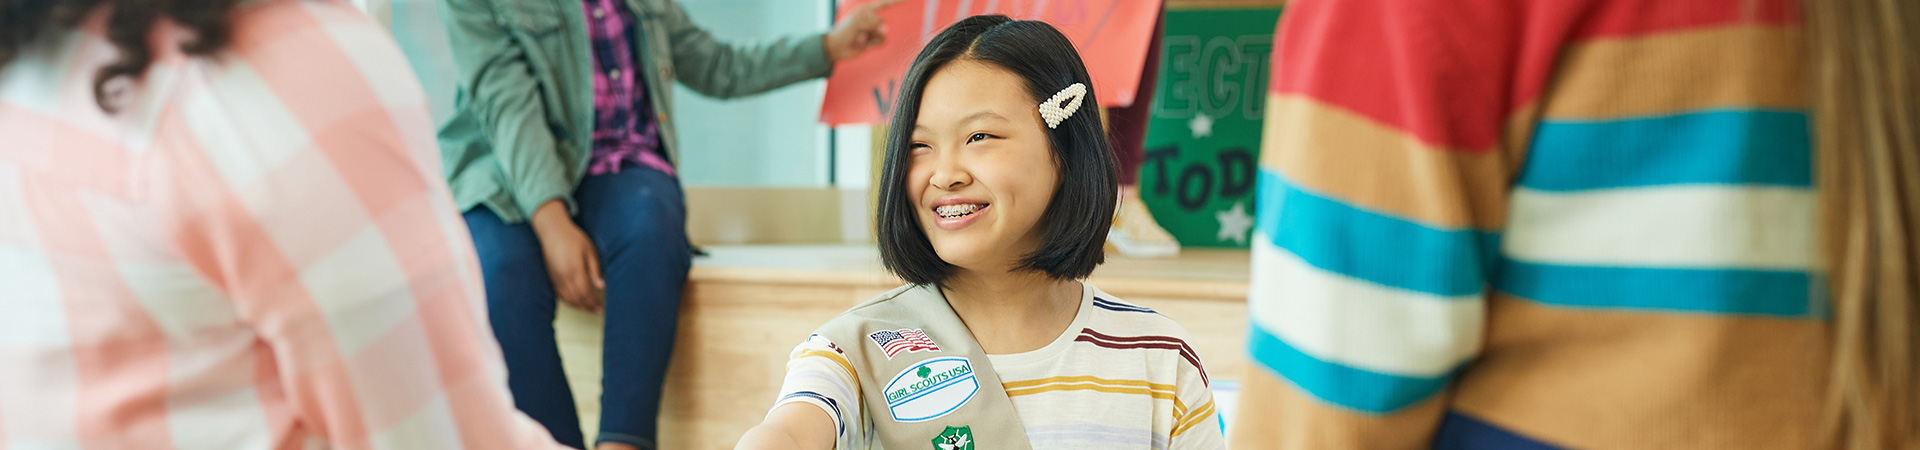  Girl Scout Senior collecting votes for a school election 